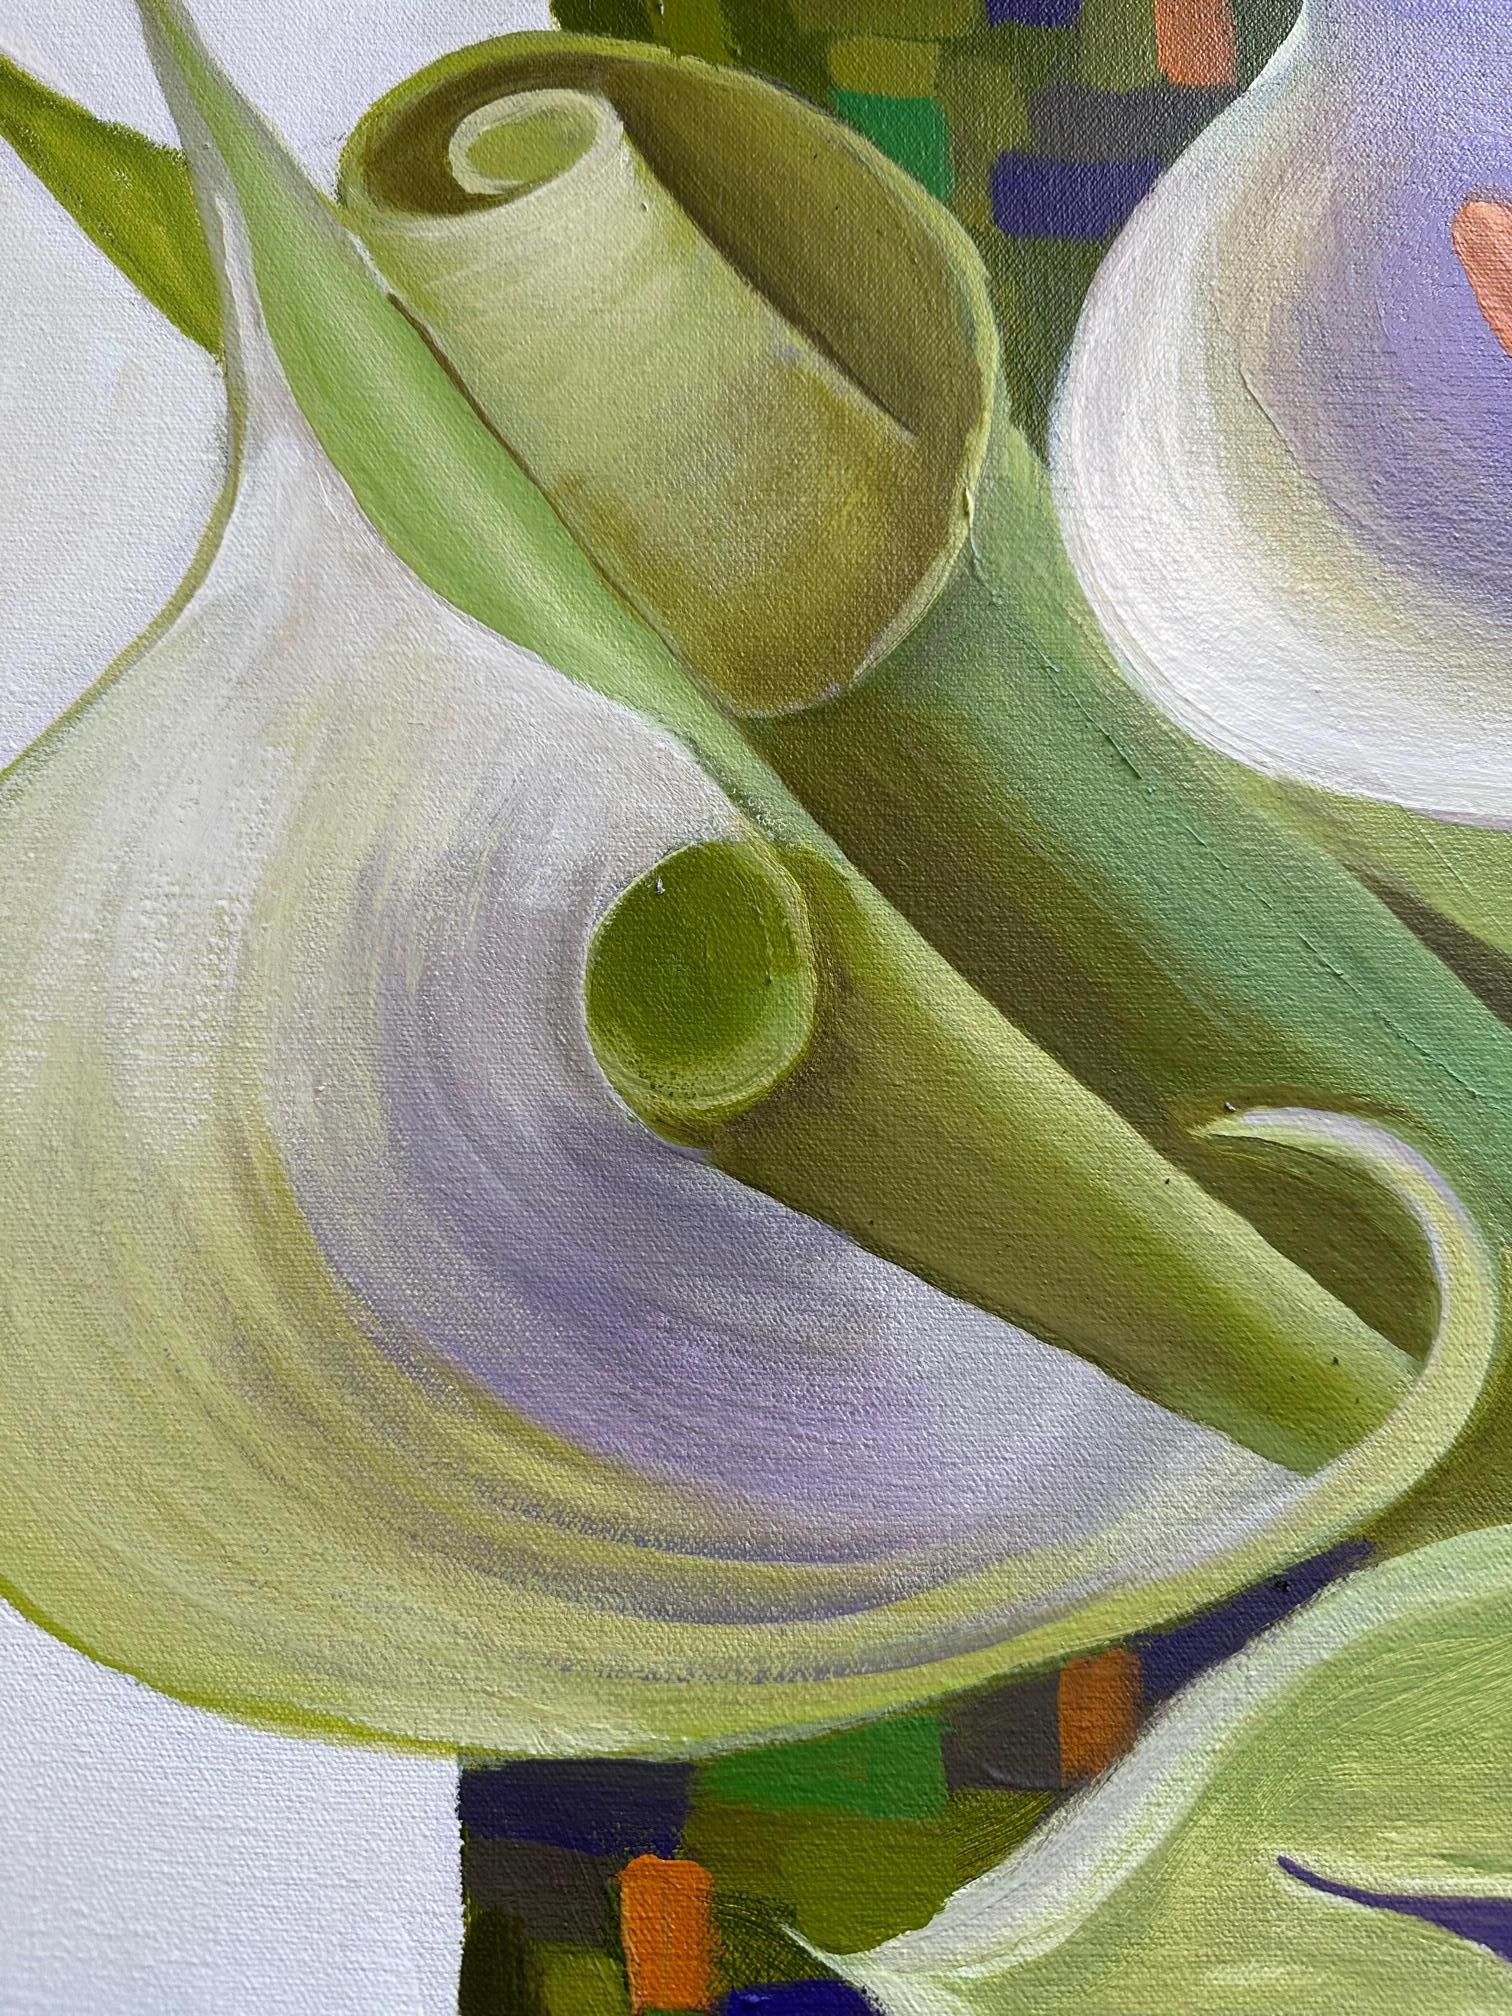  „Contained, Yet Expanding“ – Calla Lily Flowers  Marc Zimmerman im Angebot 4